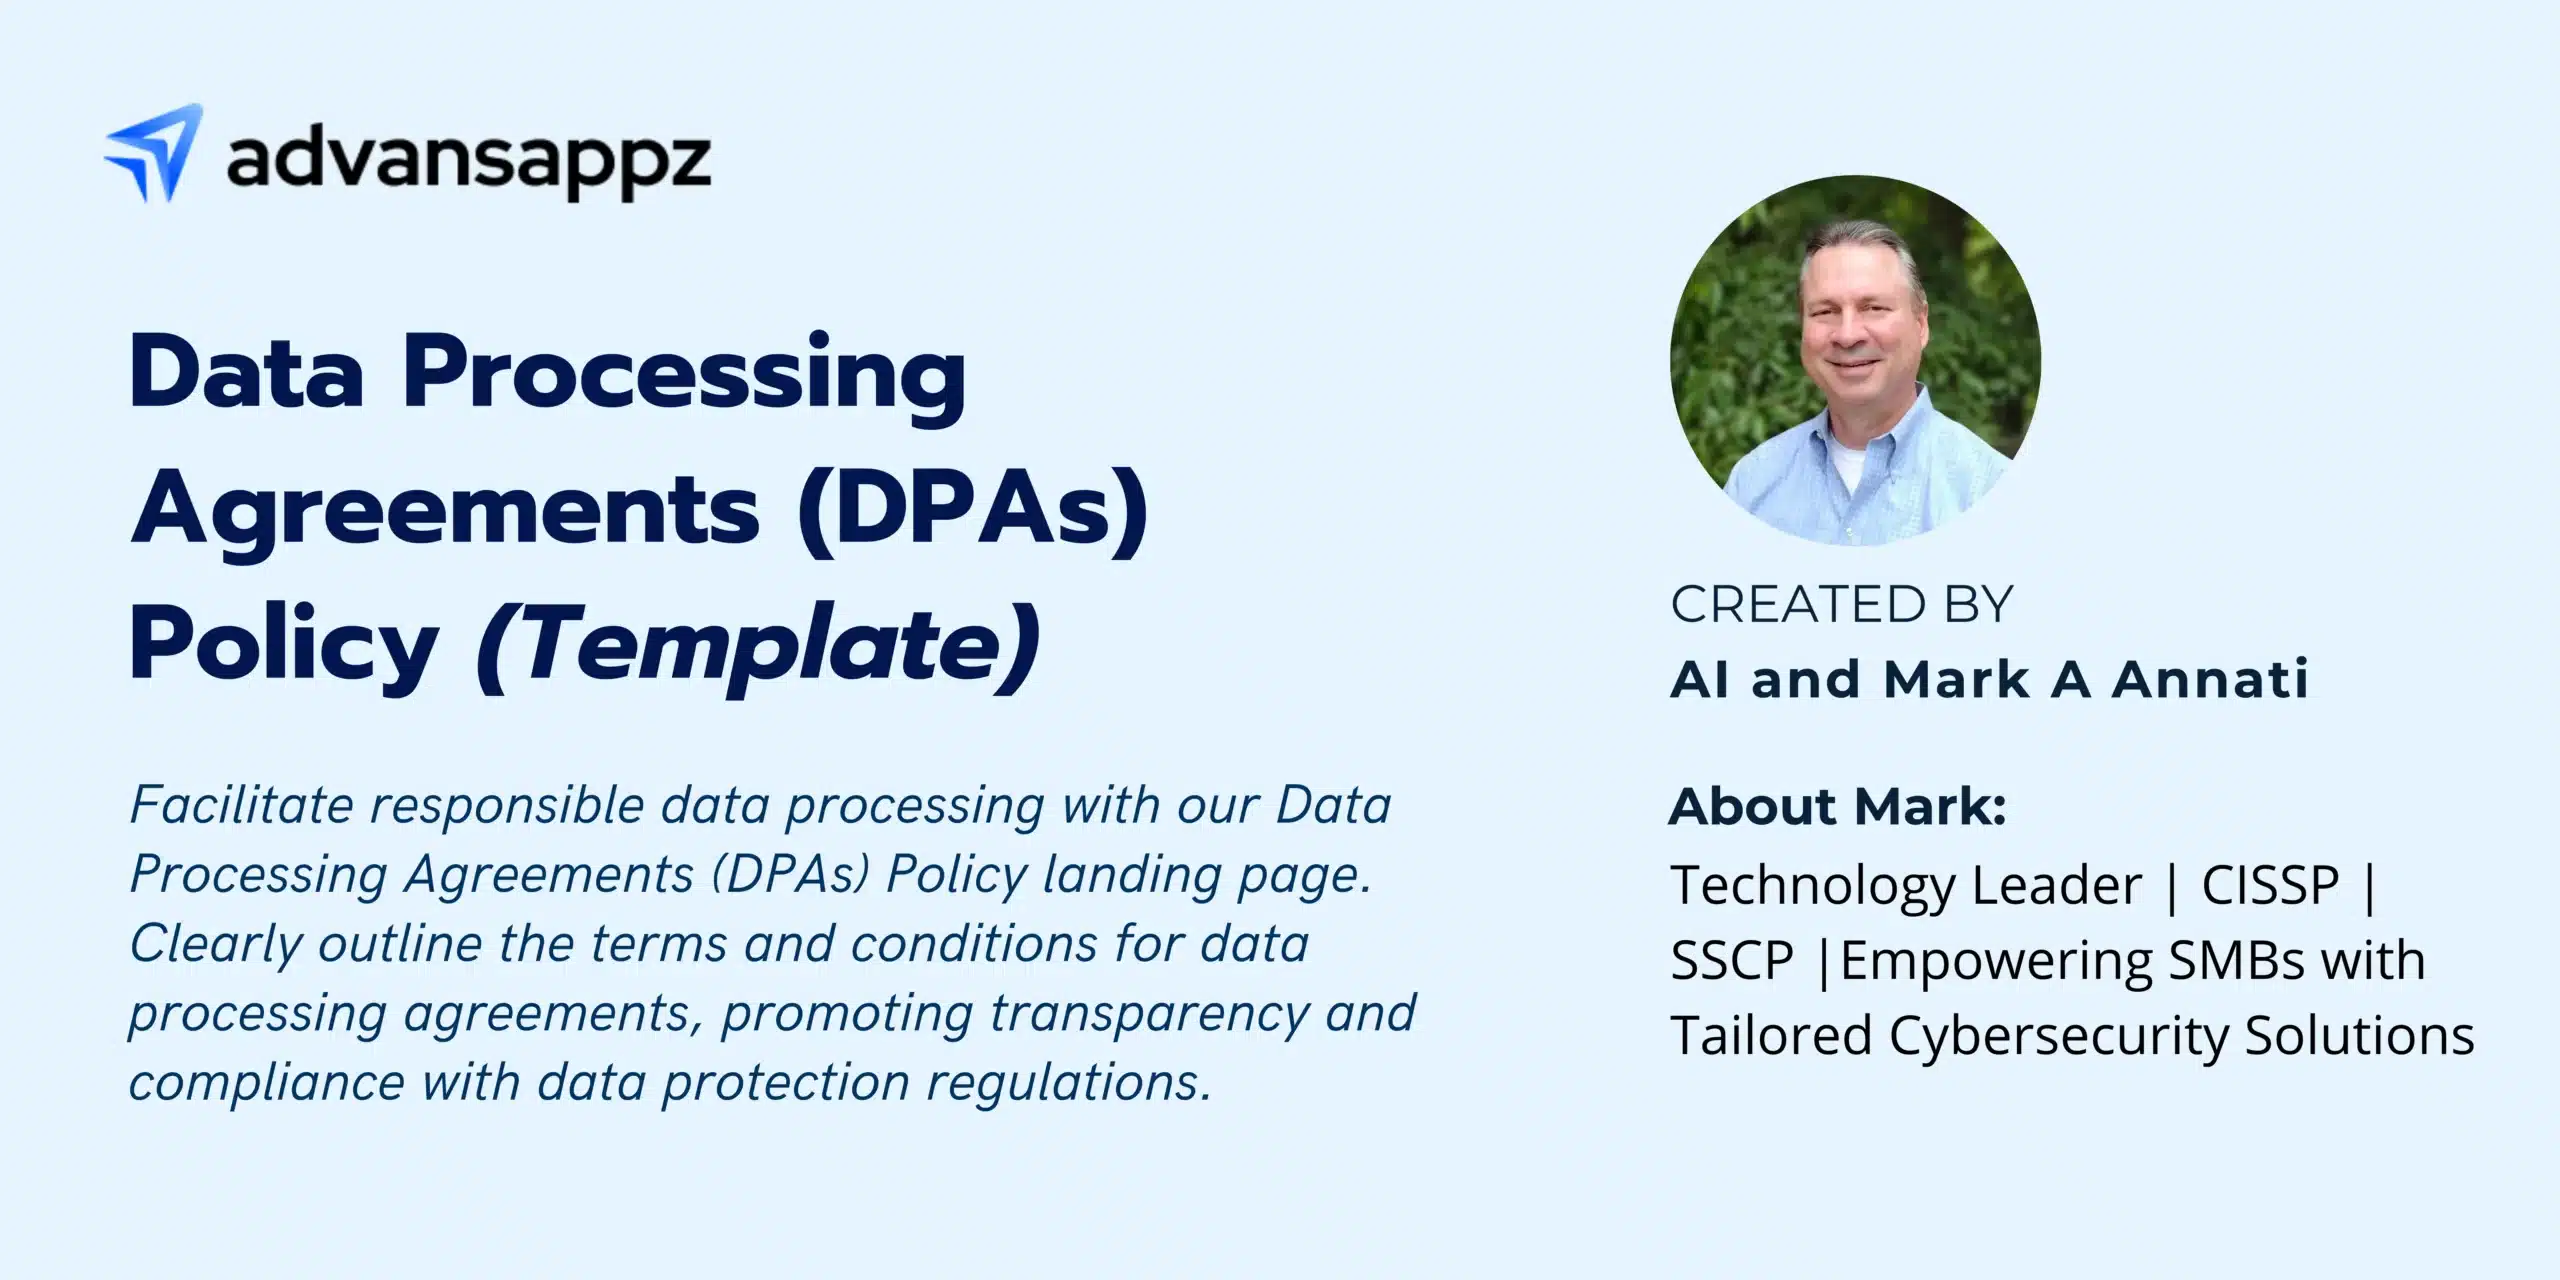 Data Processing Agreements (DPAs) Policy